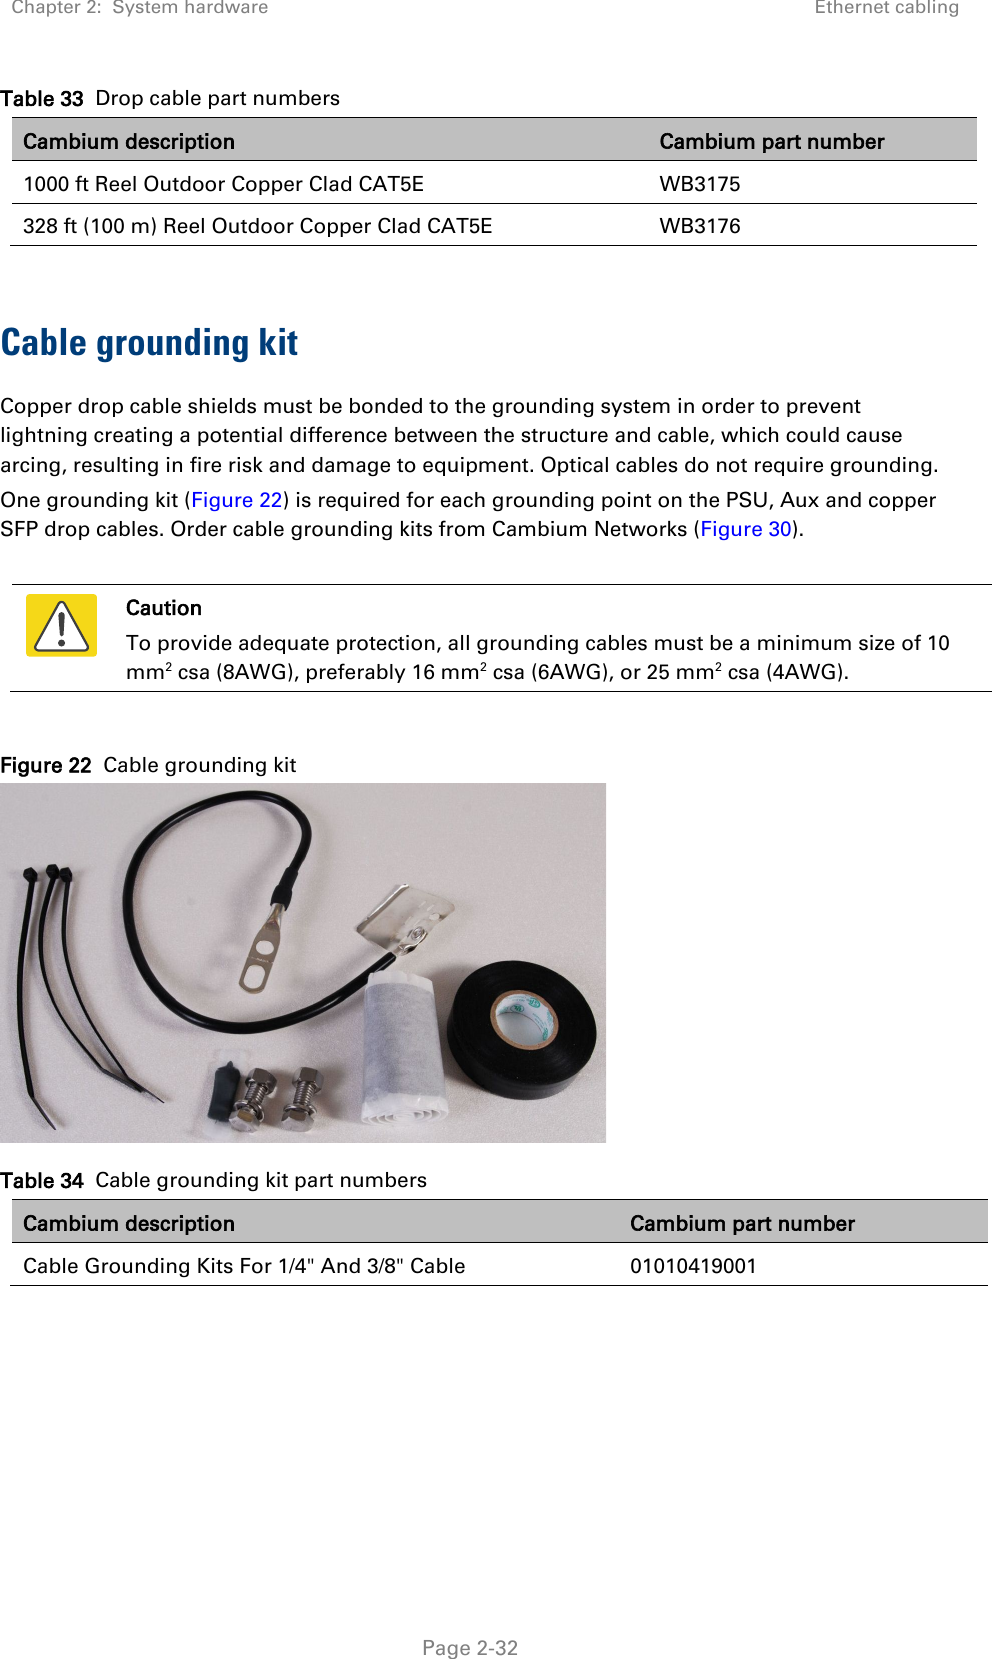 Chapter 2:  System hardware Ethernet cabling   Page 2-32 Table 33  Drop cable part numbers Cambium description Cambium part number 1000 ft Reel Outdoor Copper Clad CAT5E WB3175 328 ft (100 m) Reel Outdoor Copper Clad CAT5E WB3176  Cable grounding kit Copper drop cable shields must be bonded to the grounding system in order to prevent lightning creating a potential difference between the structure and cable, which could cause arcing, resulting in fire risk and damage to equipment. Optical cables do not require grounding. One grounding kit (Figure 22) is required for each grounding point on the PSU, Aux and copper SFP drop cables. Order cable grounding kits from Cambium Networks (Figure 30).   Caution To provide adequate protection, all grounding cables must be a minimum size of 10 mm2 csa (8AWG), preferably 16 mm2 csa (6AWG), or 25 mm2 csa (4AWG).  Figure 22  Cable grounding kit  Table 34  Cable grounding kit part numbers Cambium description Cambium part number Cable Grounding Kits For 1/4&quot; And 3/8&quot; Cable 01010419001     